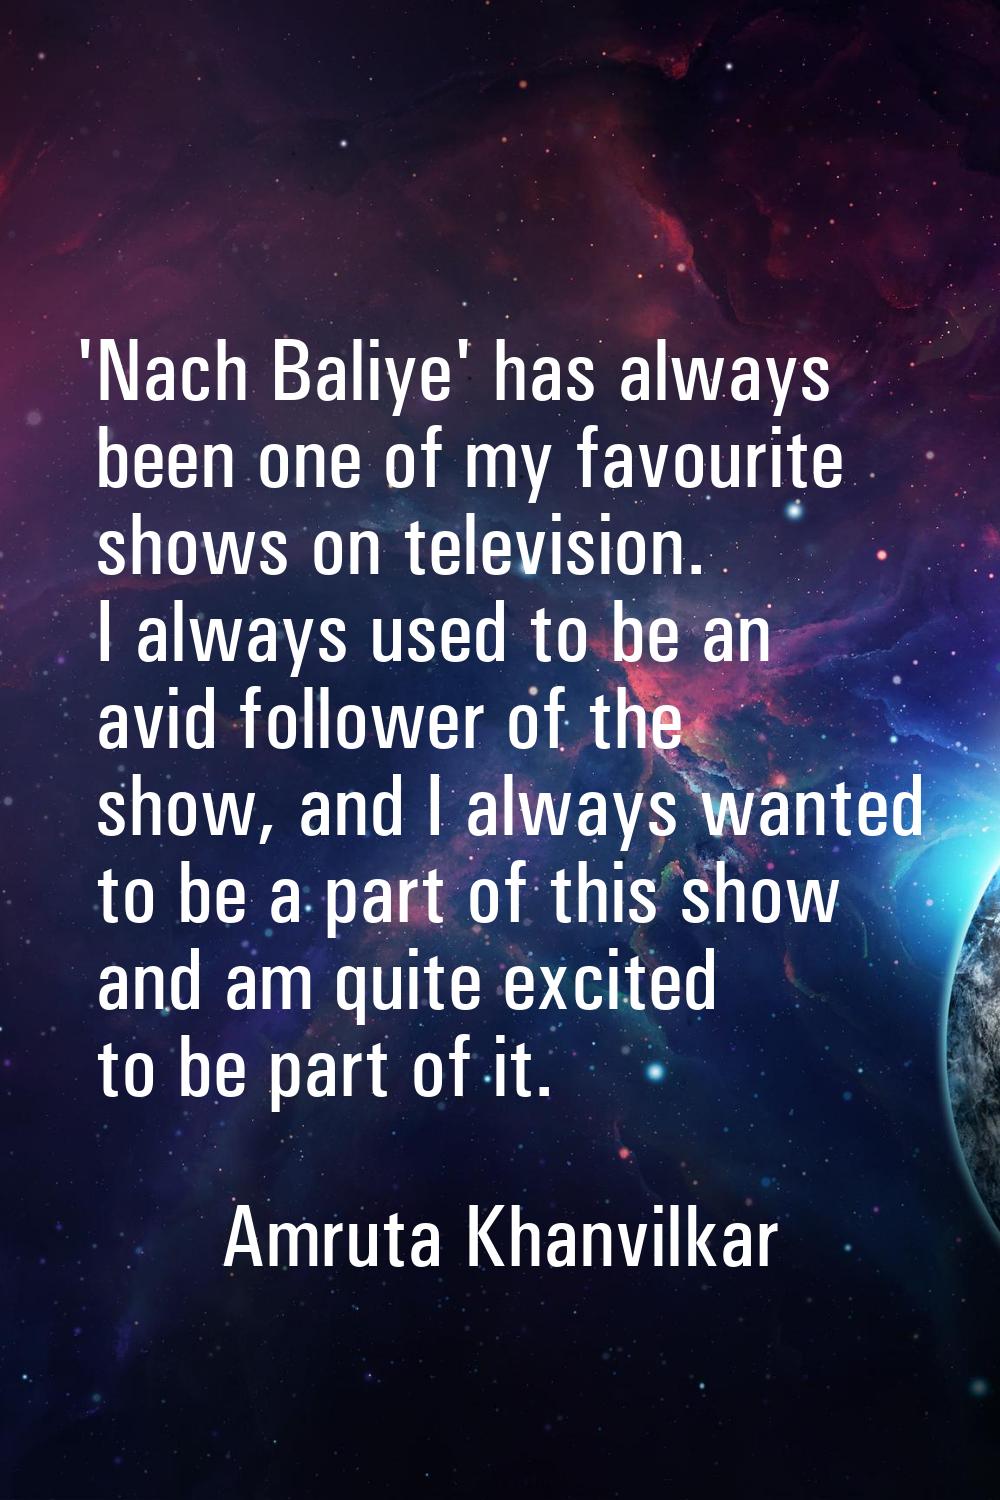 'Nach Baliye' has always been one of my favourite shows on television. I always used to be an avid 